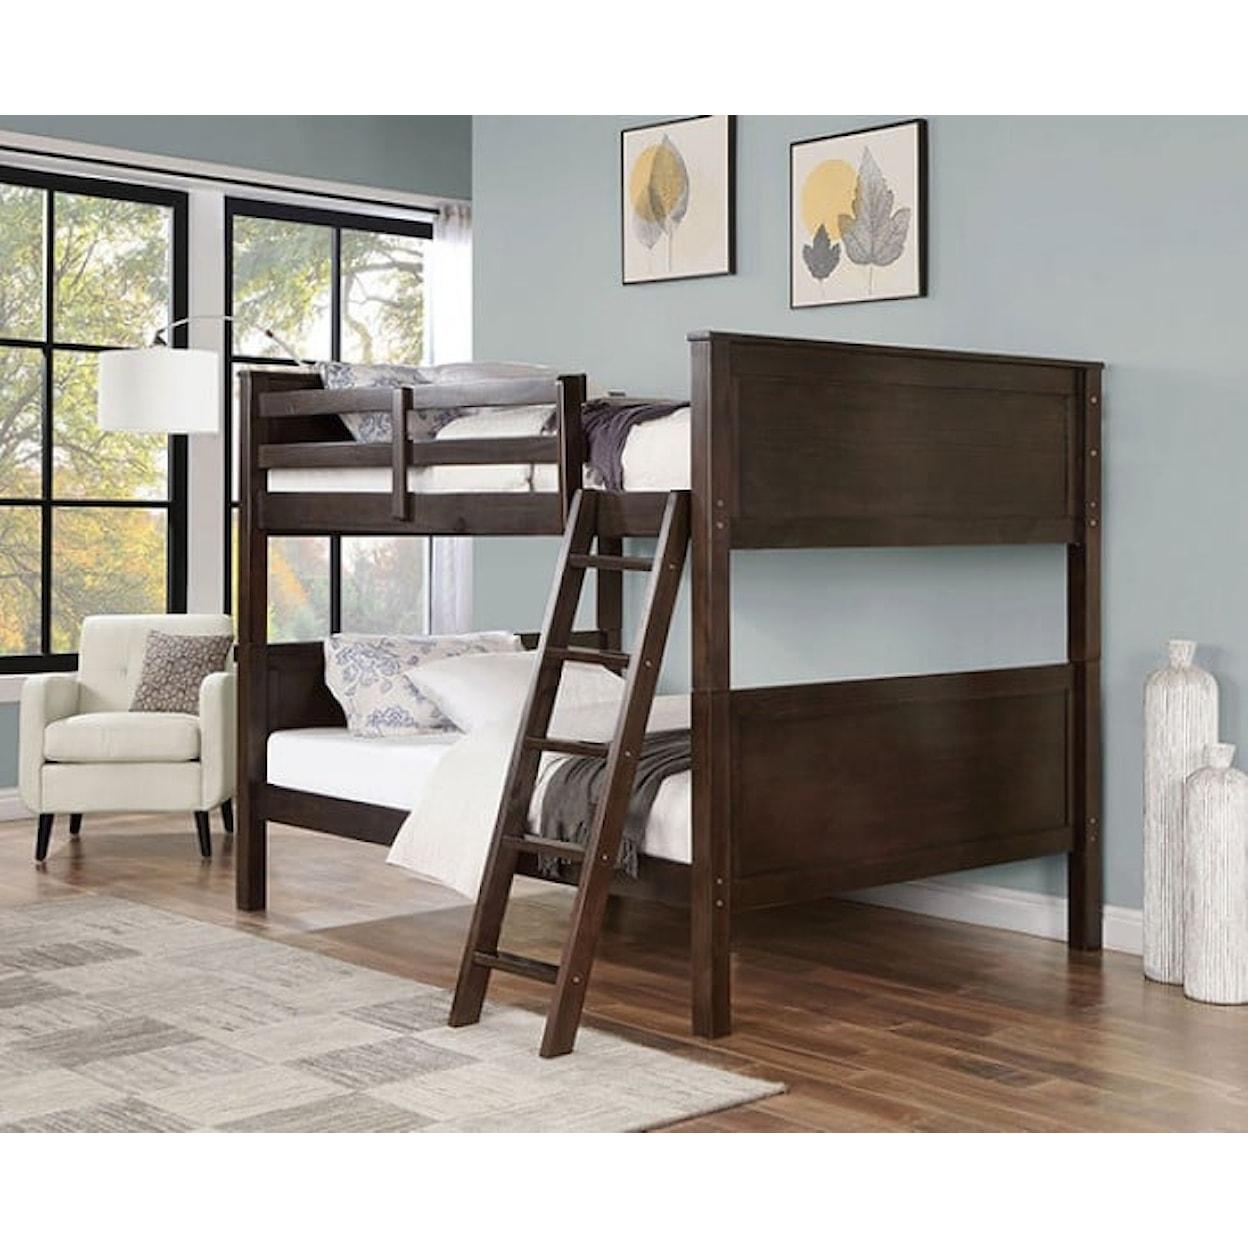 Furniture of America STAMOS Full Bunk Bed